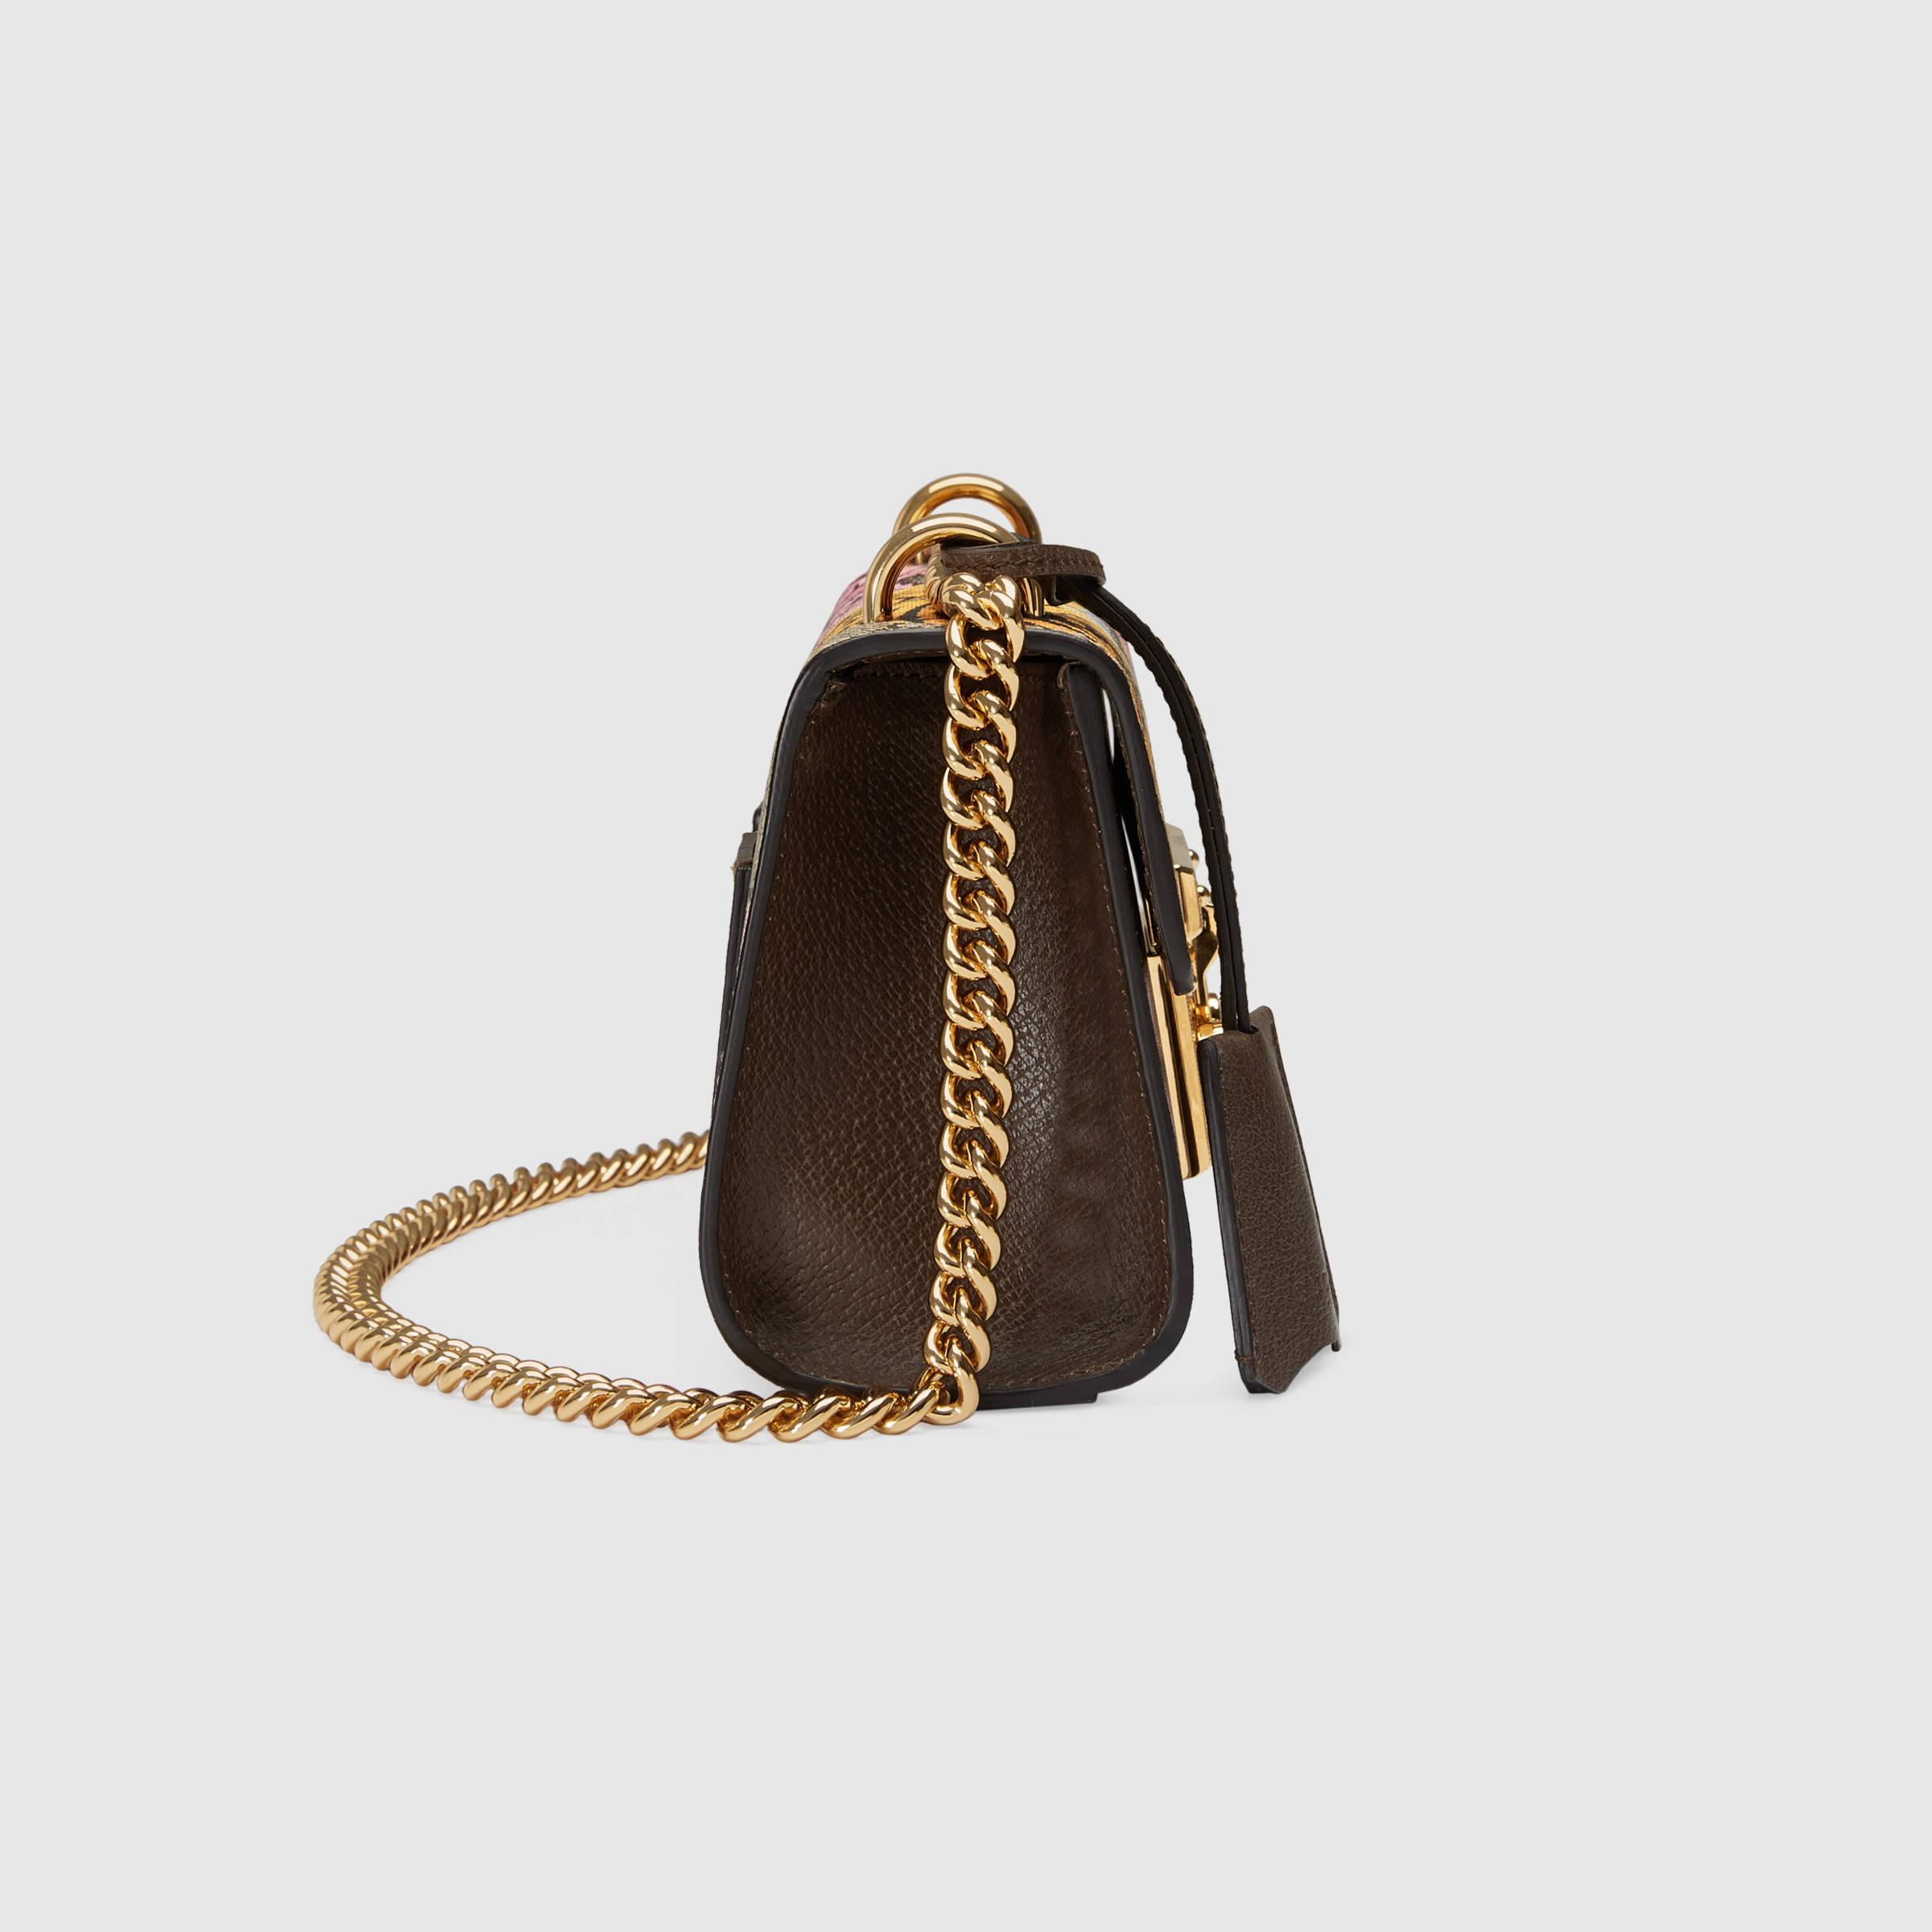 Lyst - Gucci Padlock Bengal GG Supreme Canvas And Leather Shoulder Bag